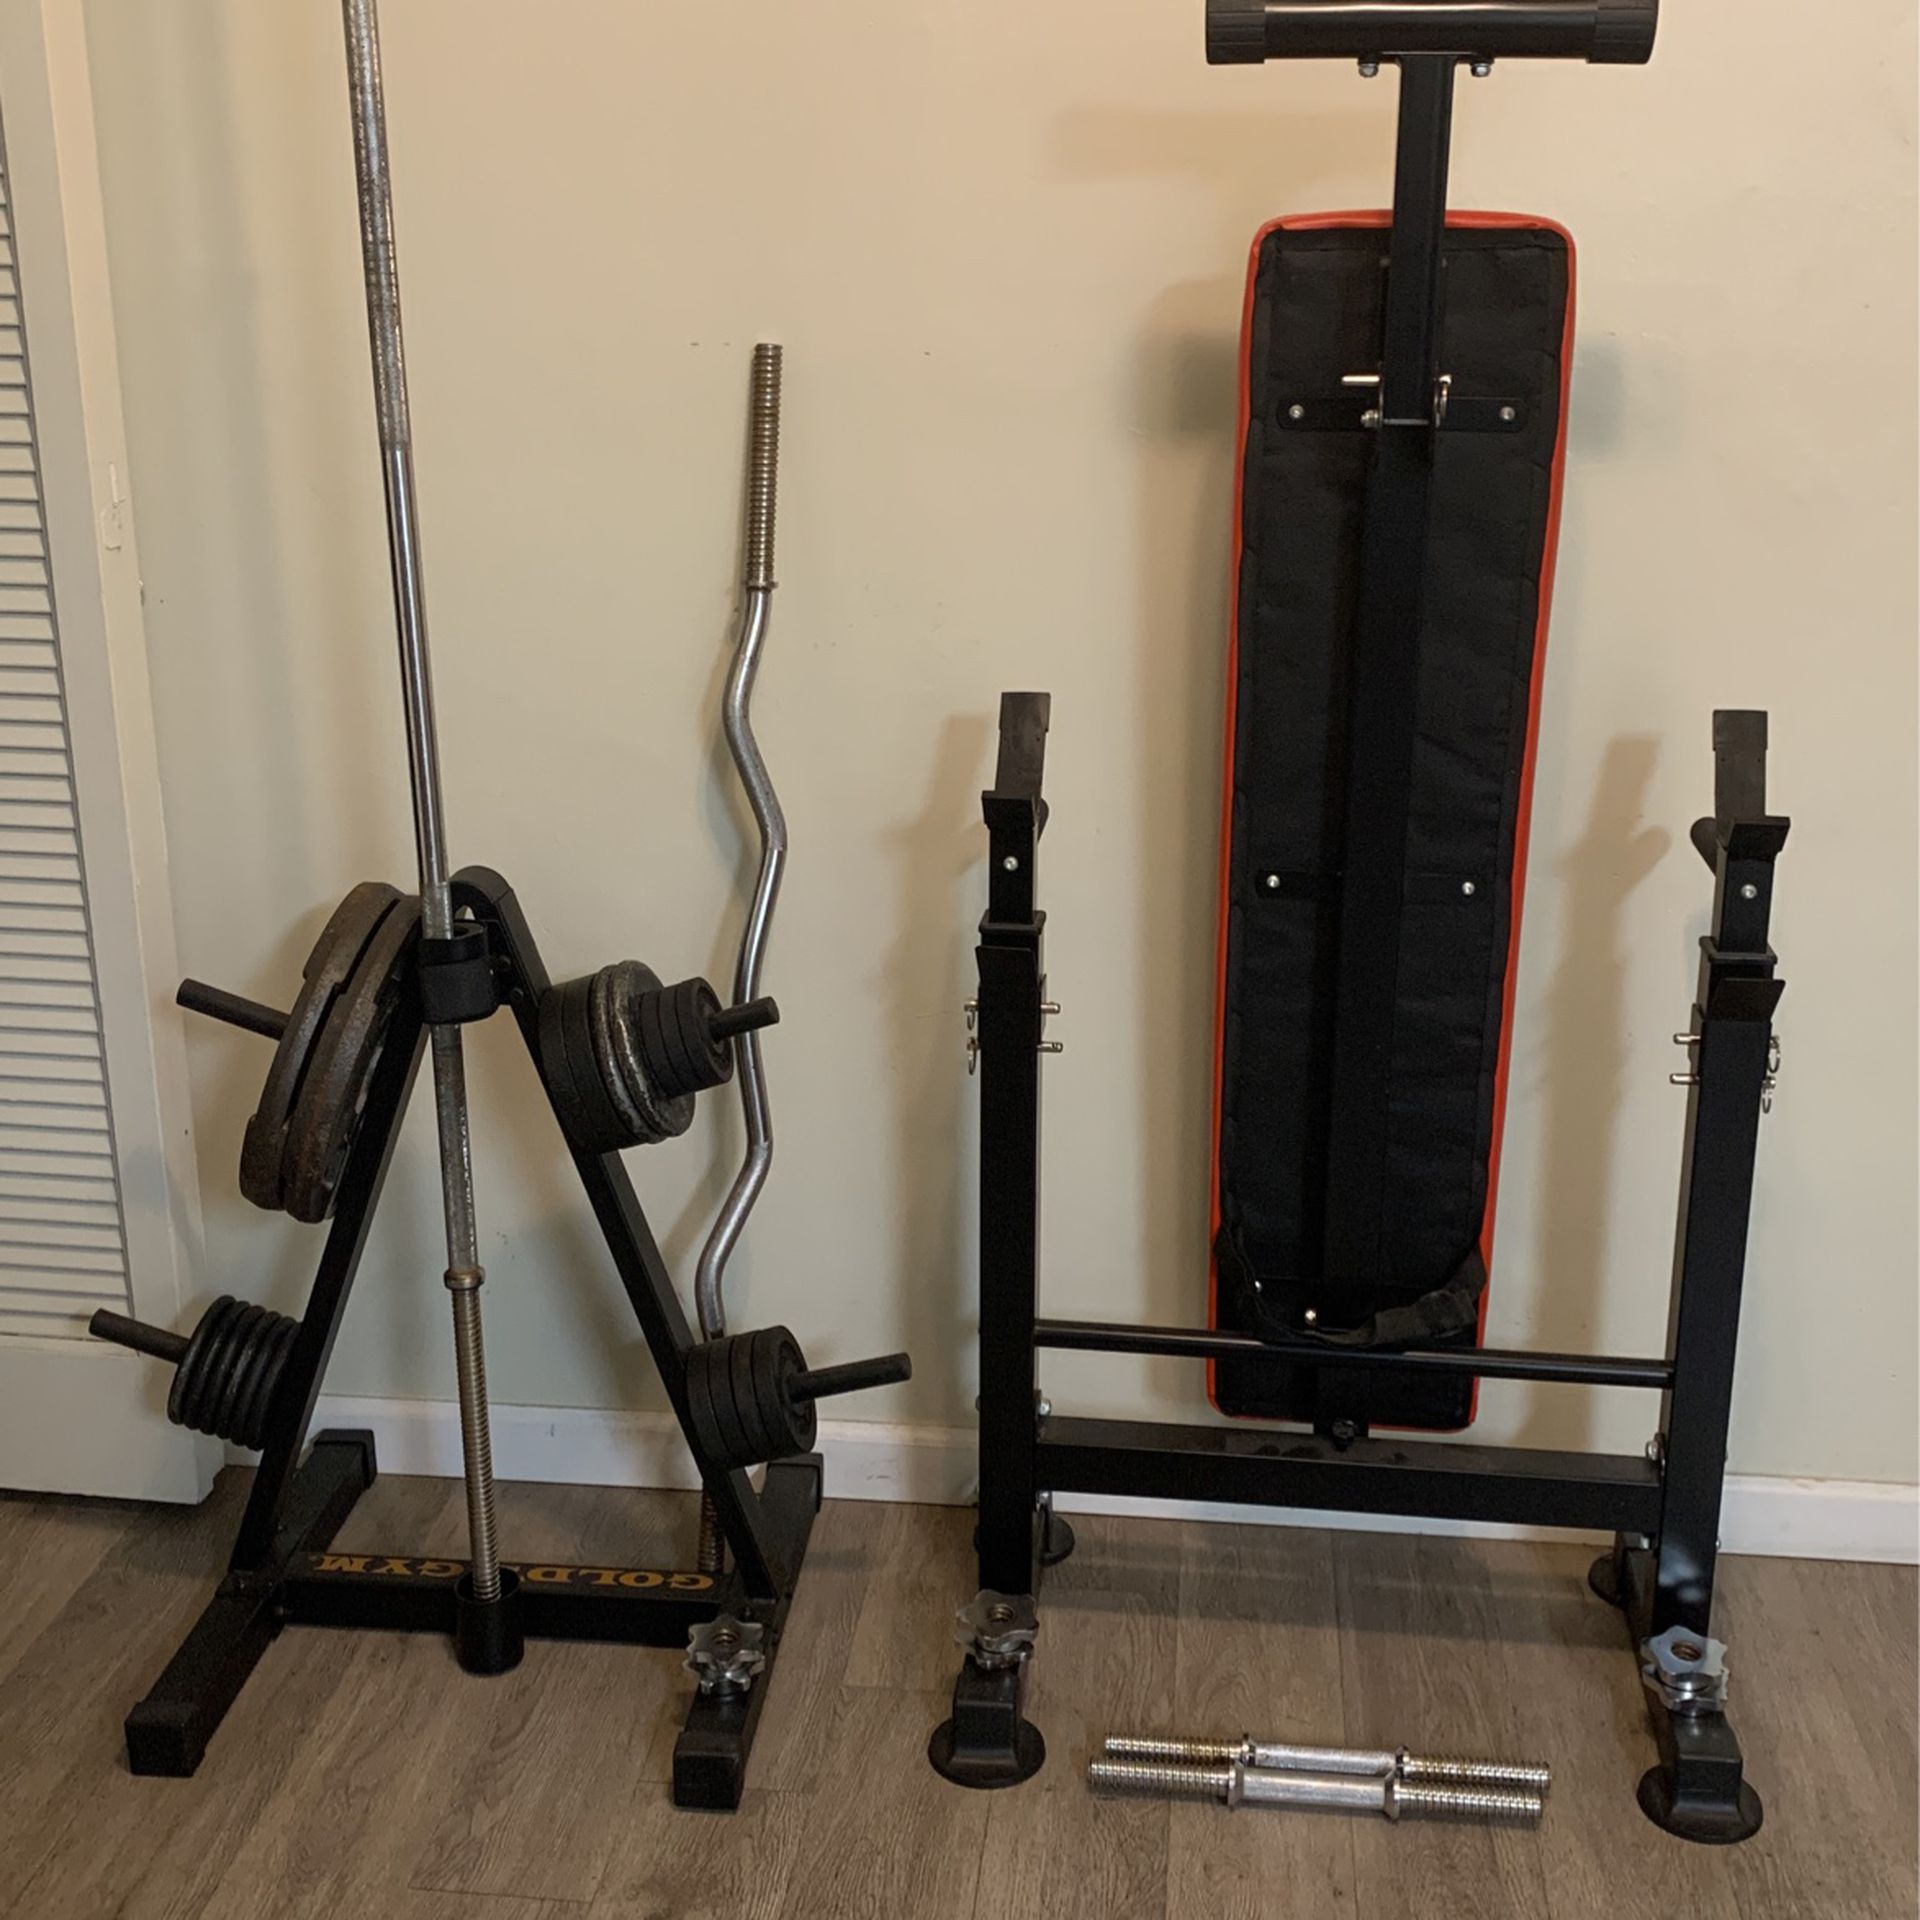 Weights, Bench, Rack, Bars And Dumbbells 